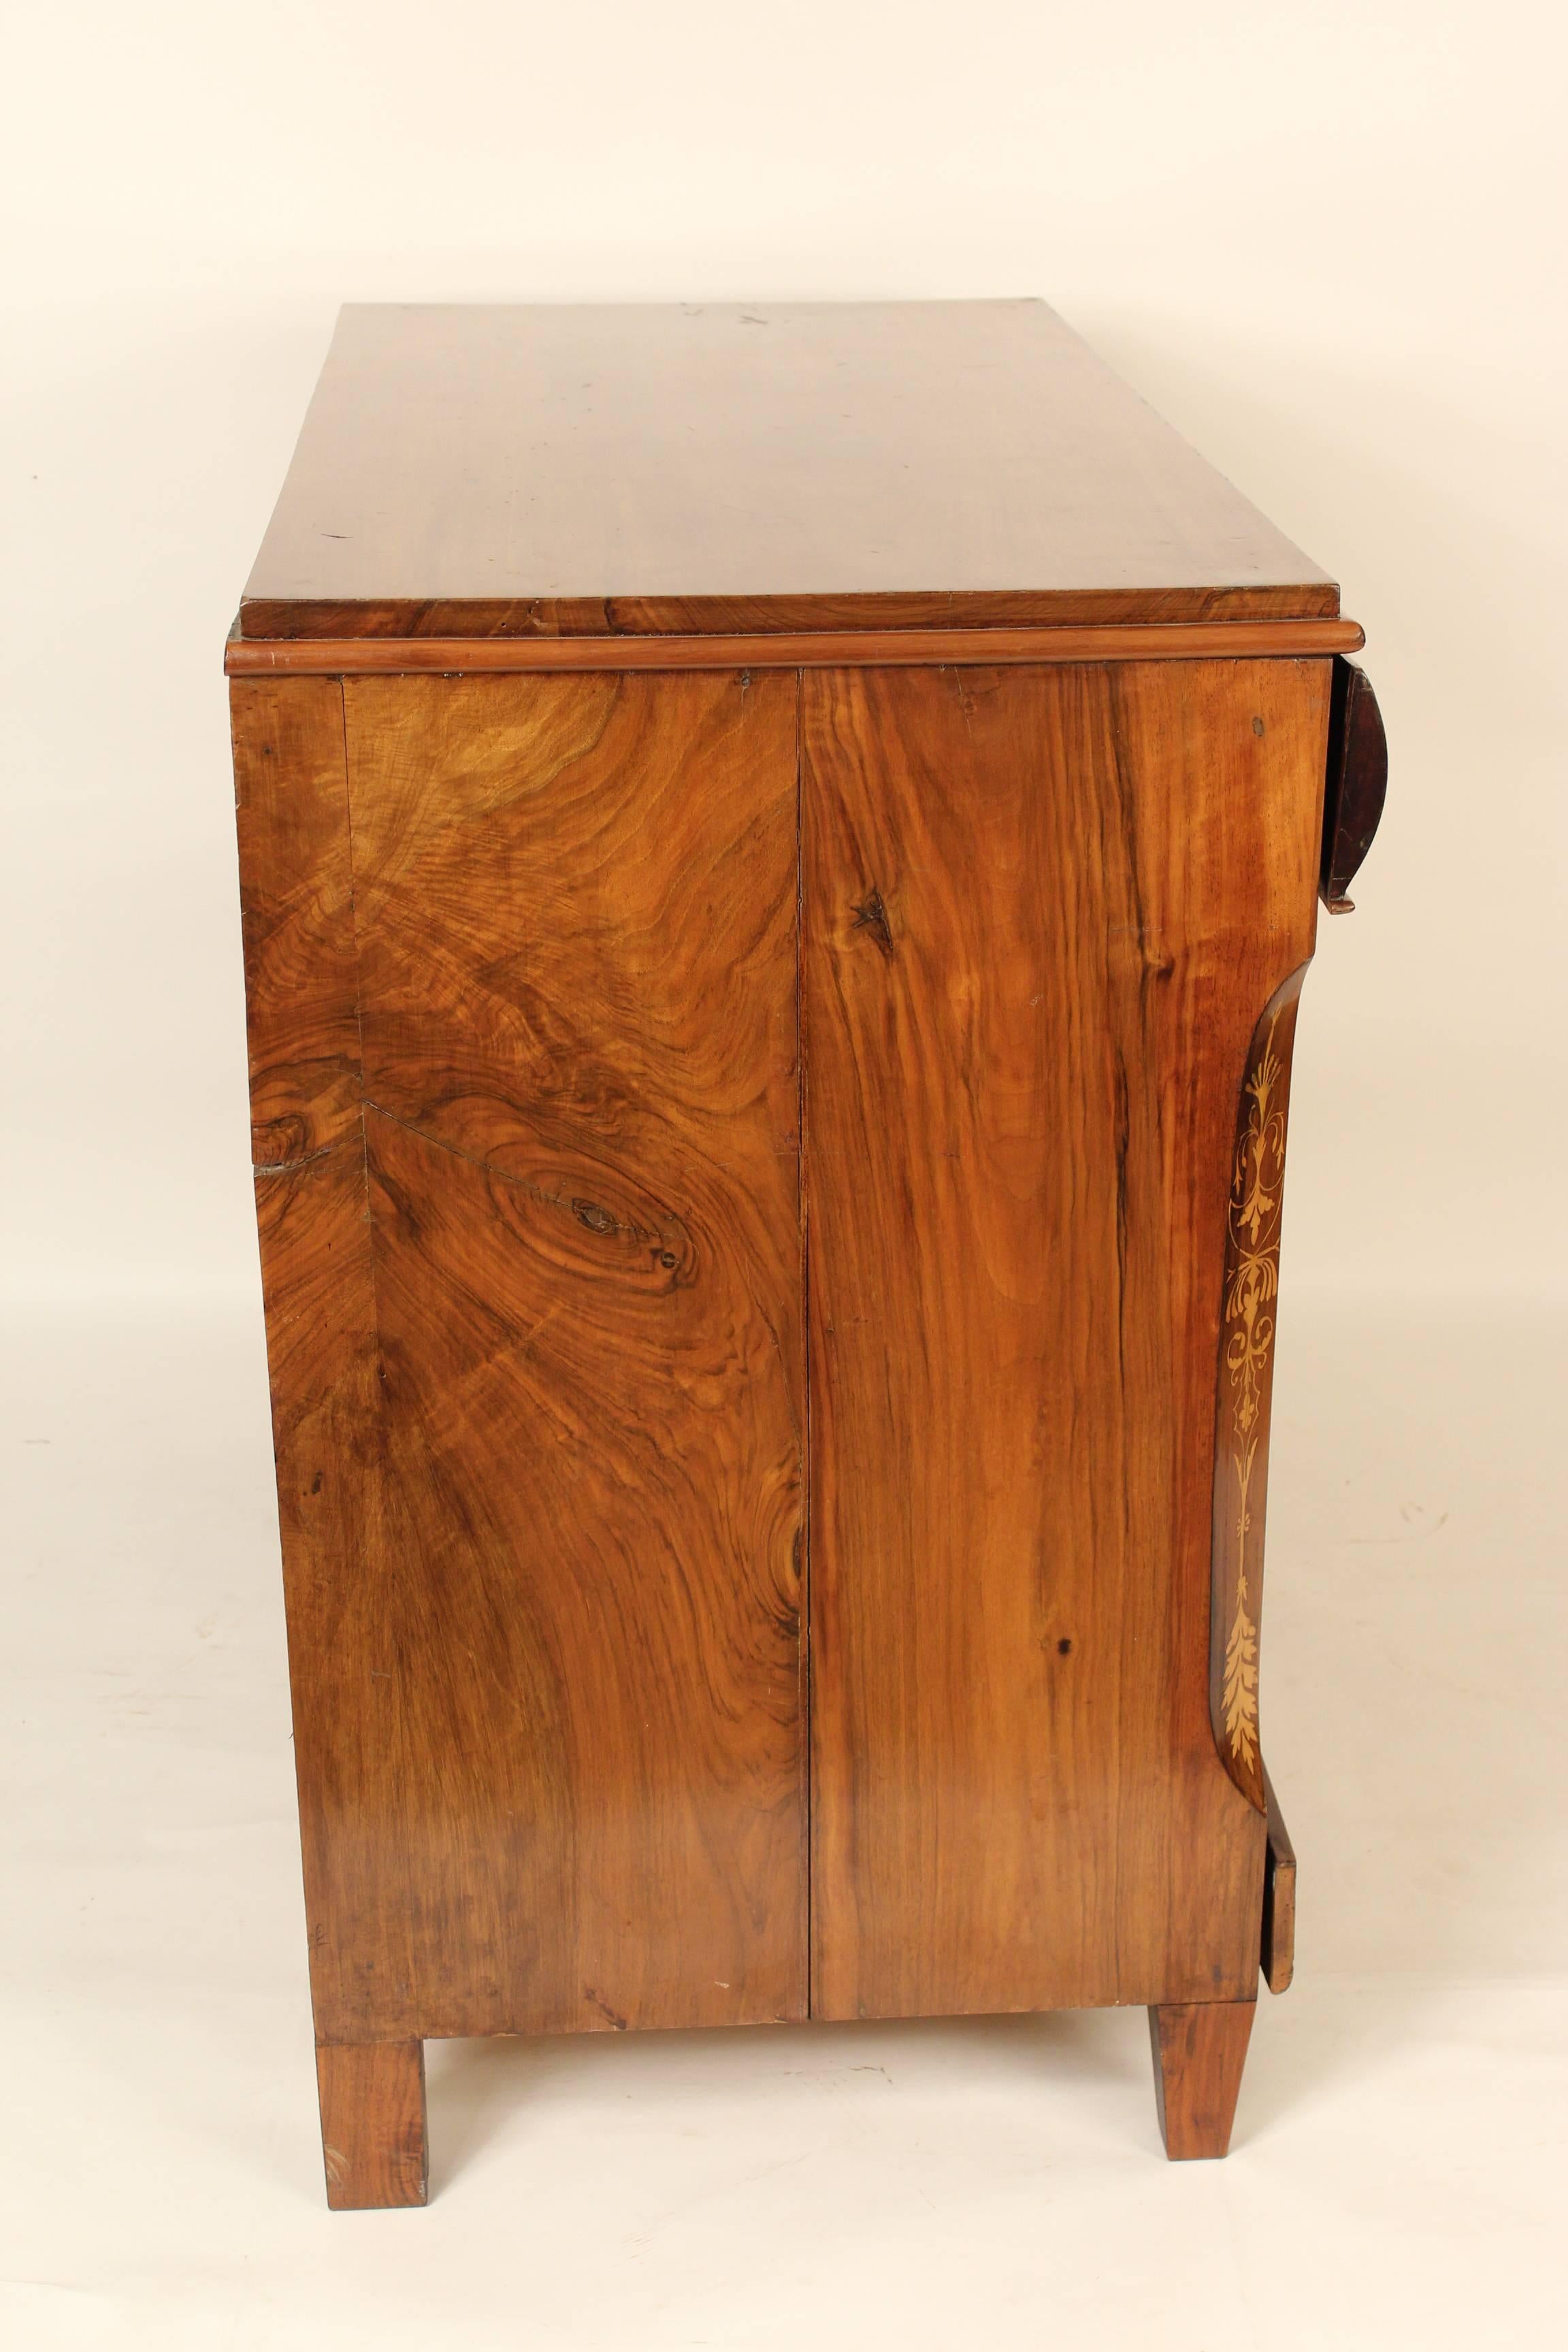 Neoclassical inlaid walnut chest of drawers/desk, 19th century. No key.